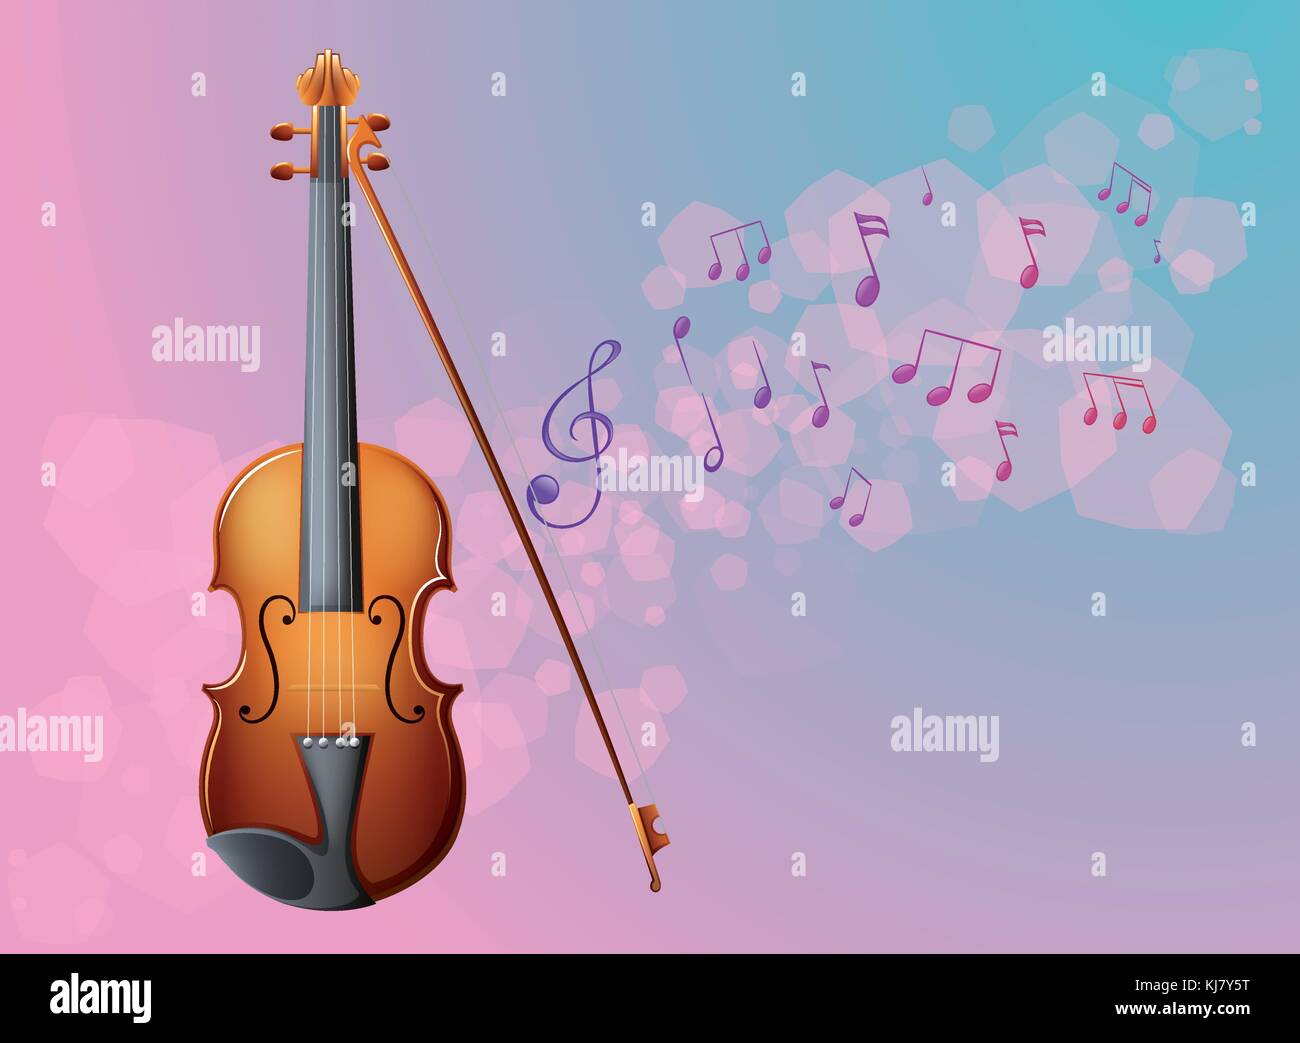 Illustration of a stationery with a violin and musical notes Stock Vector